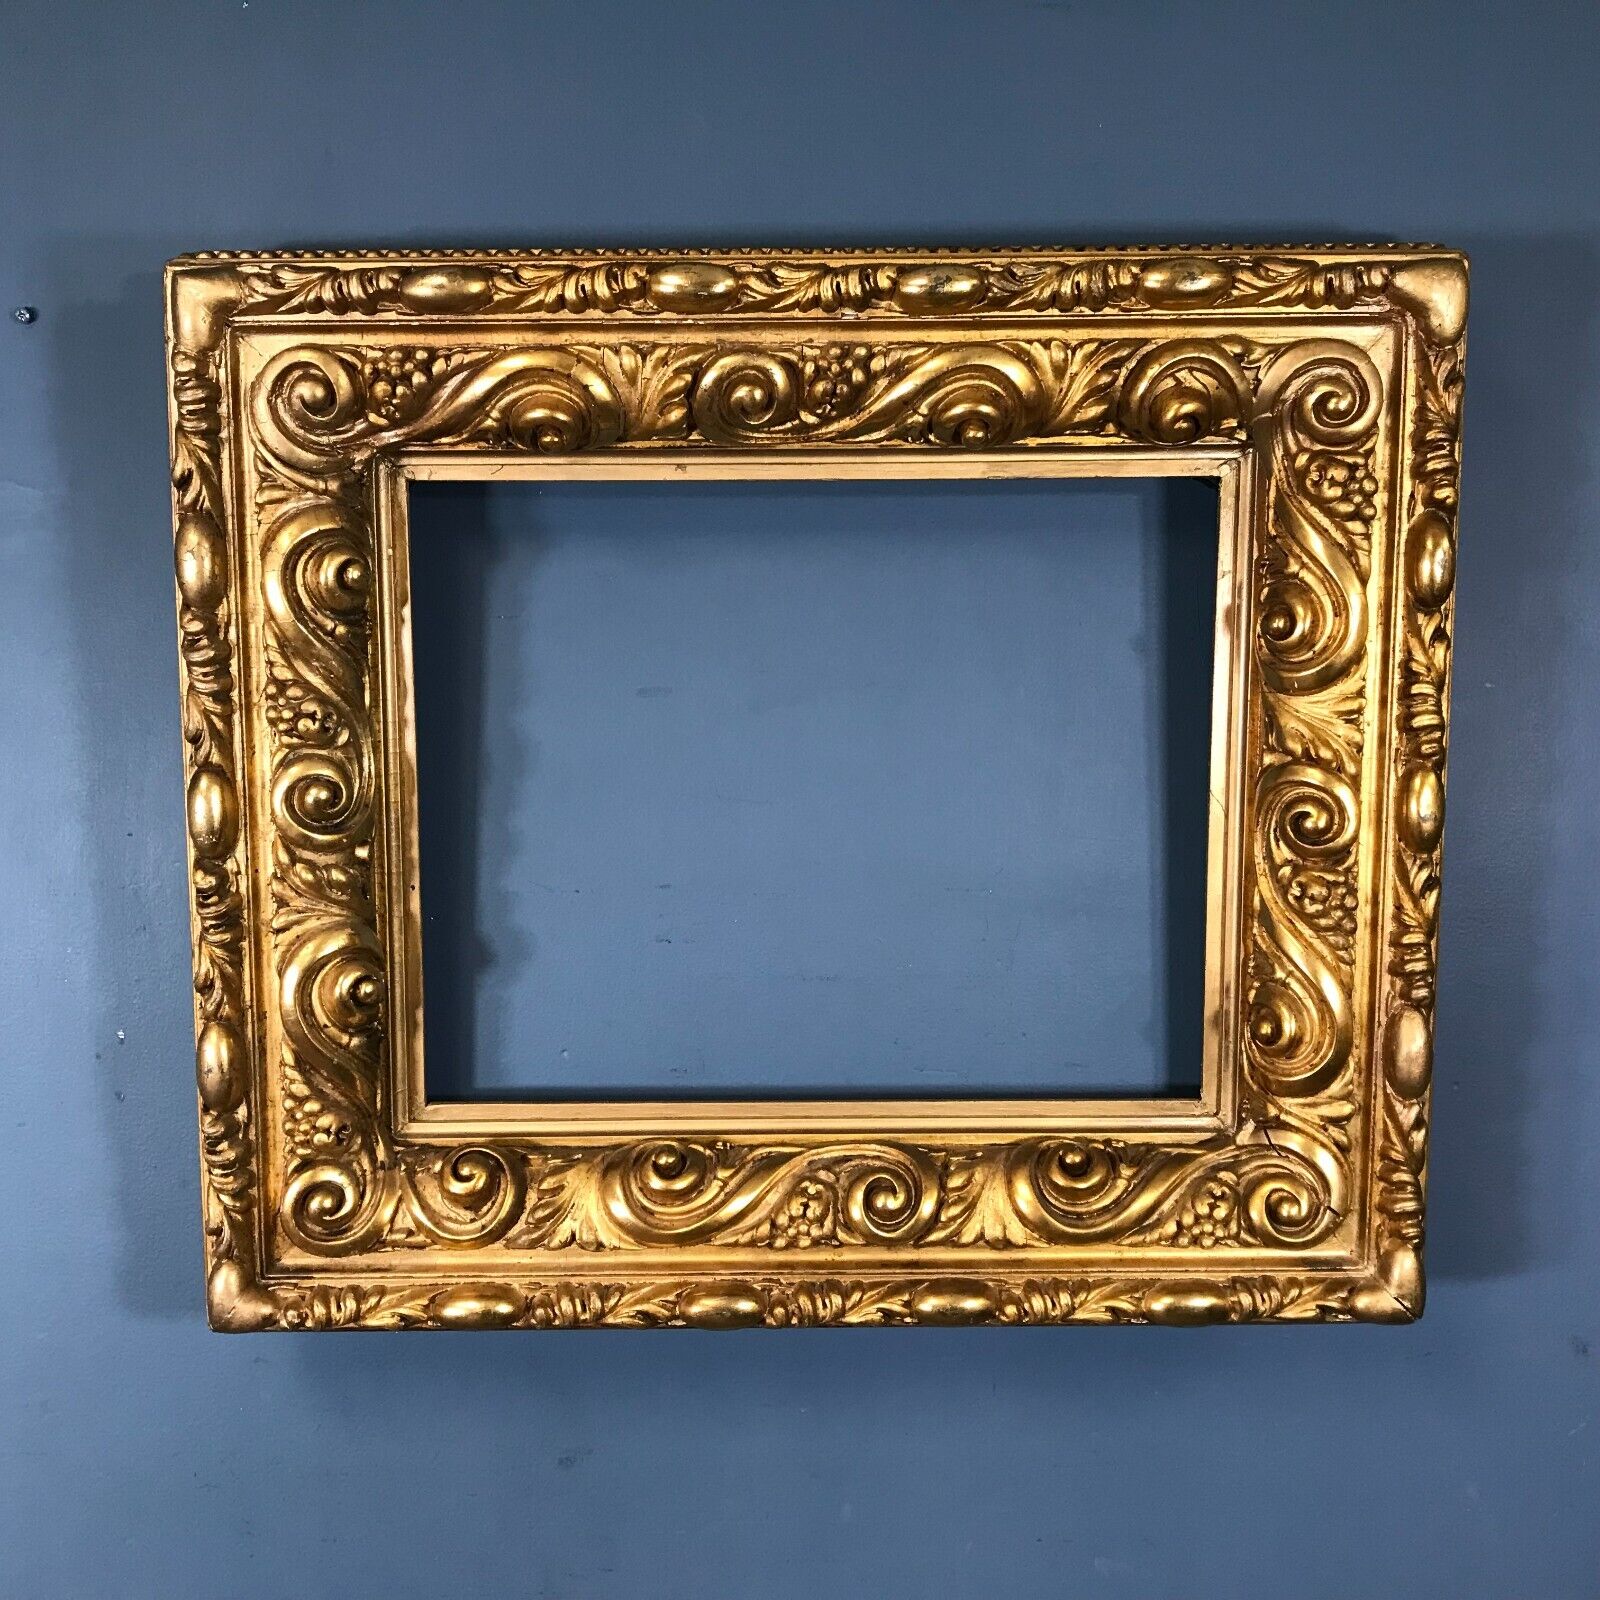 Exceptional 19th C. Carved Gilt Frame for a 16